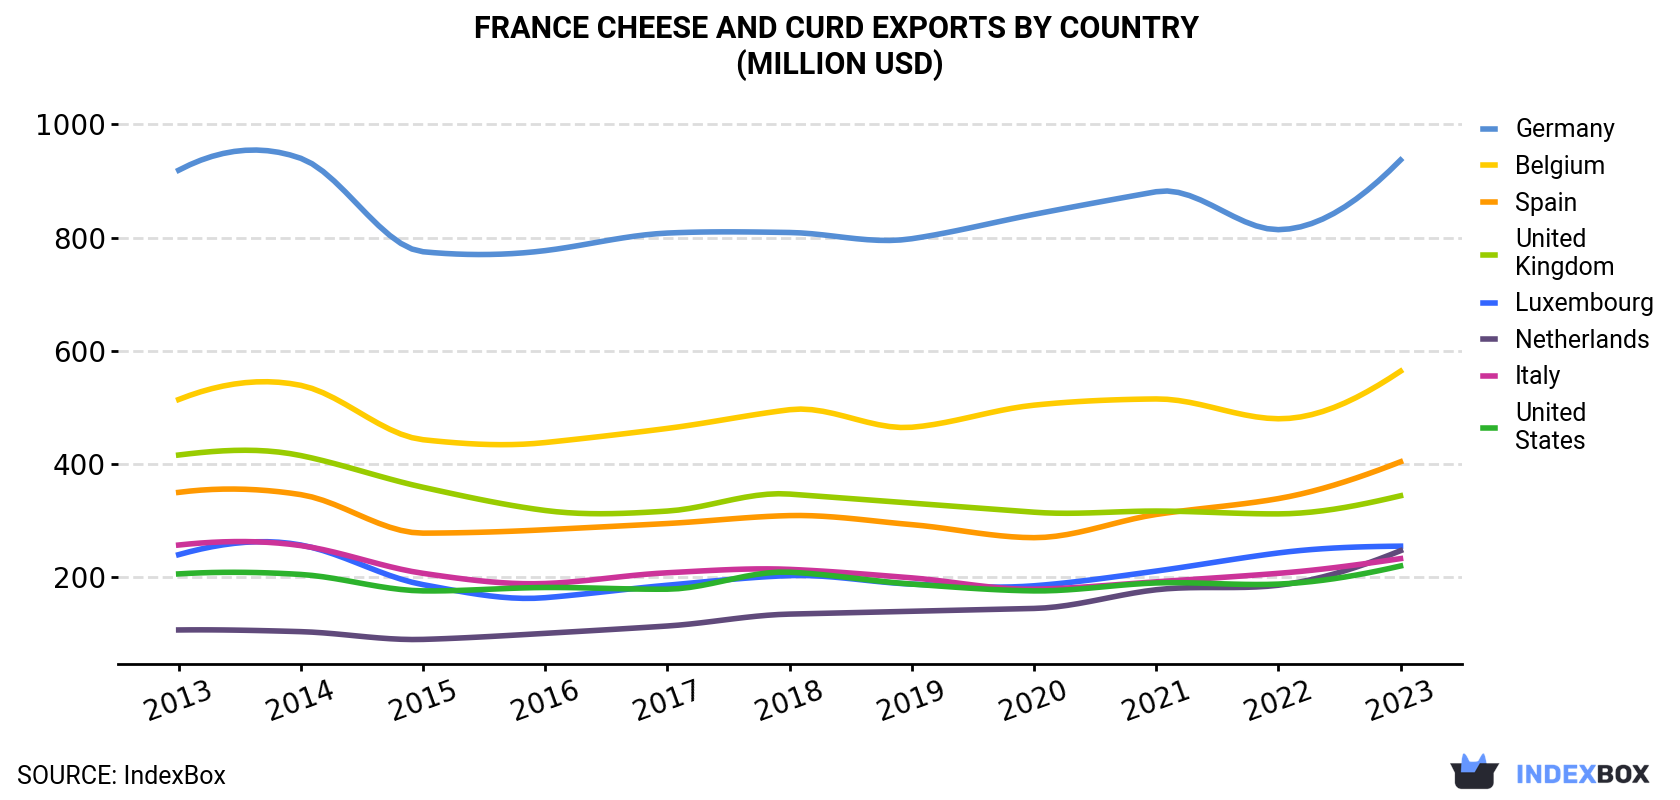 France Cheese and Curd Exports By Country (Million USD)